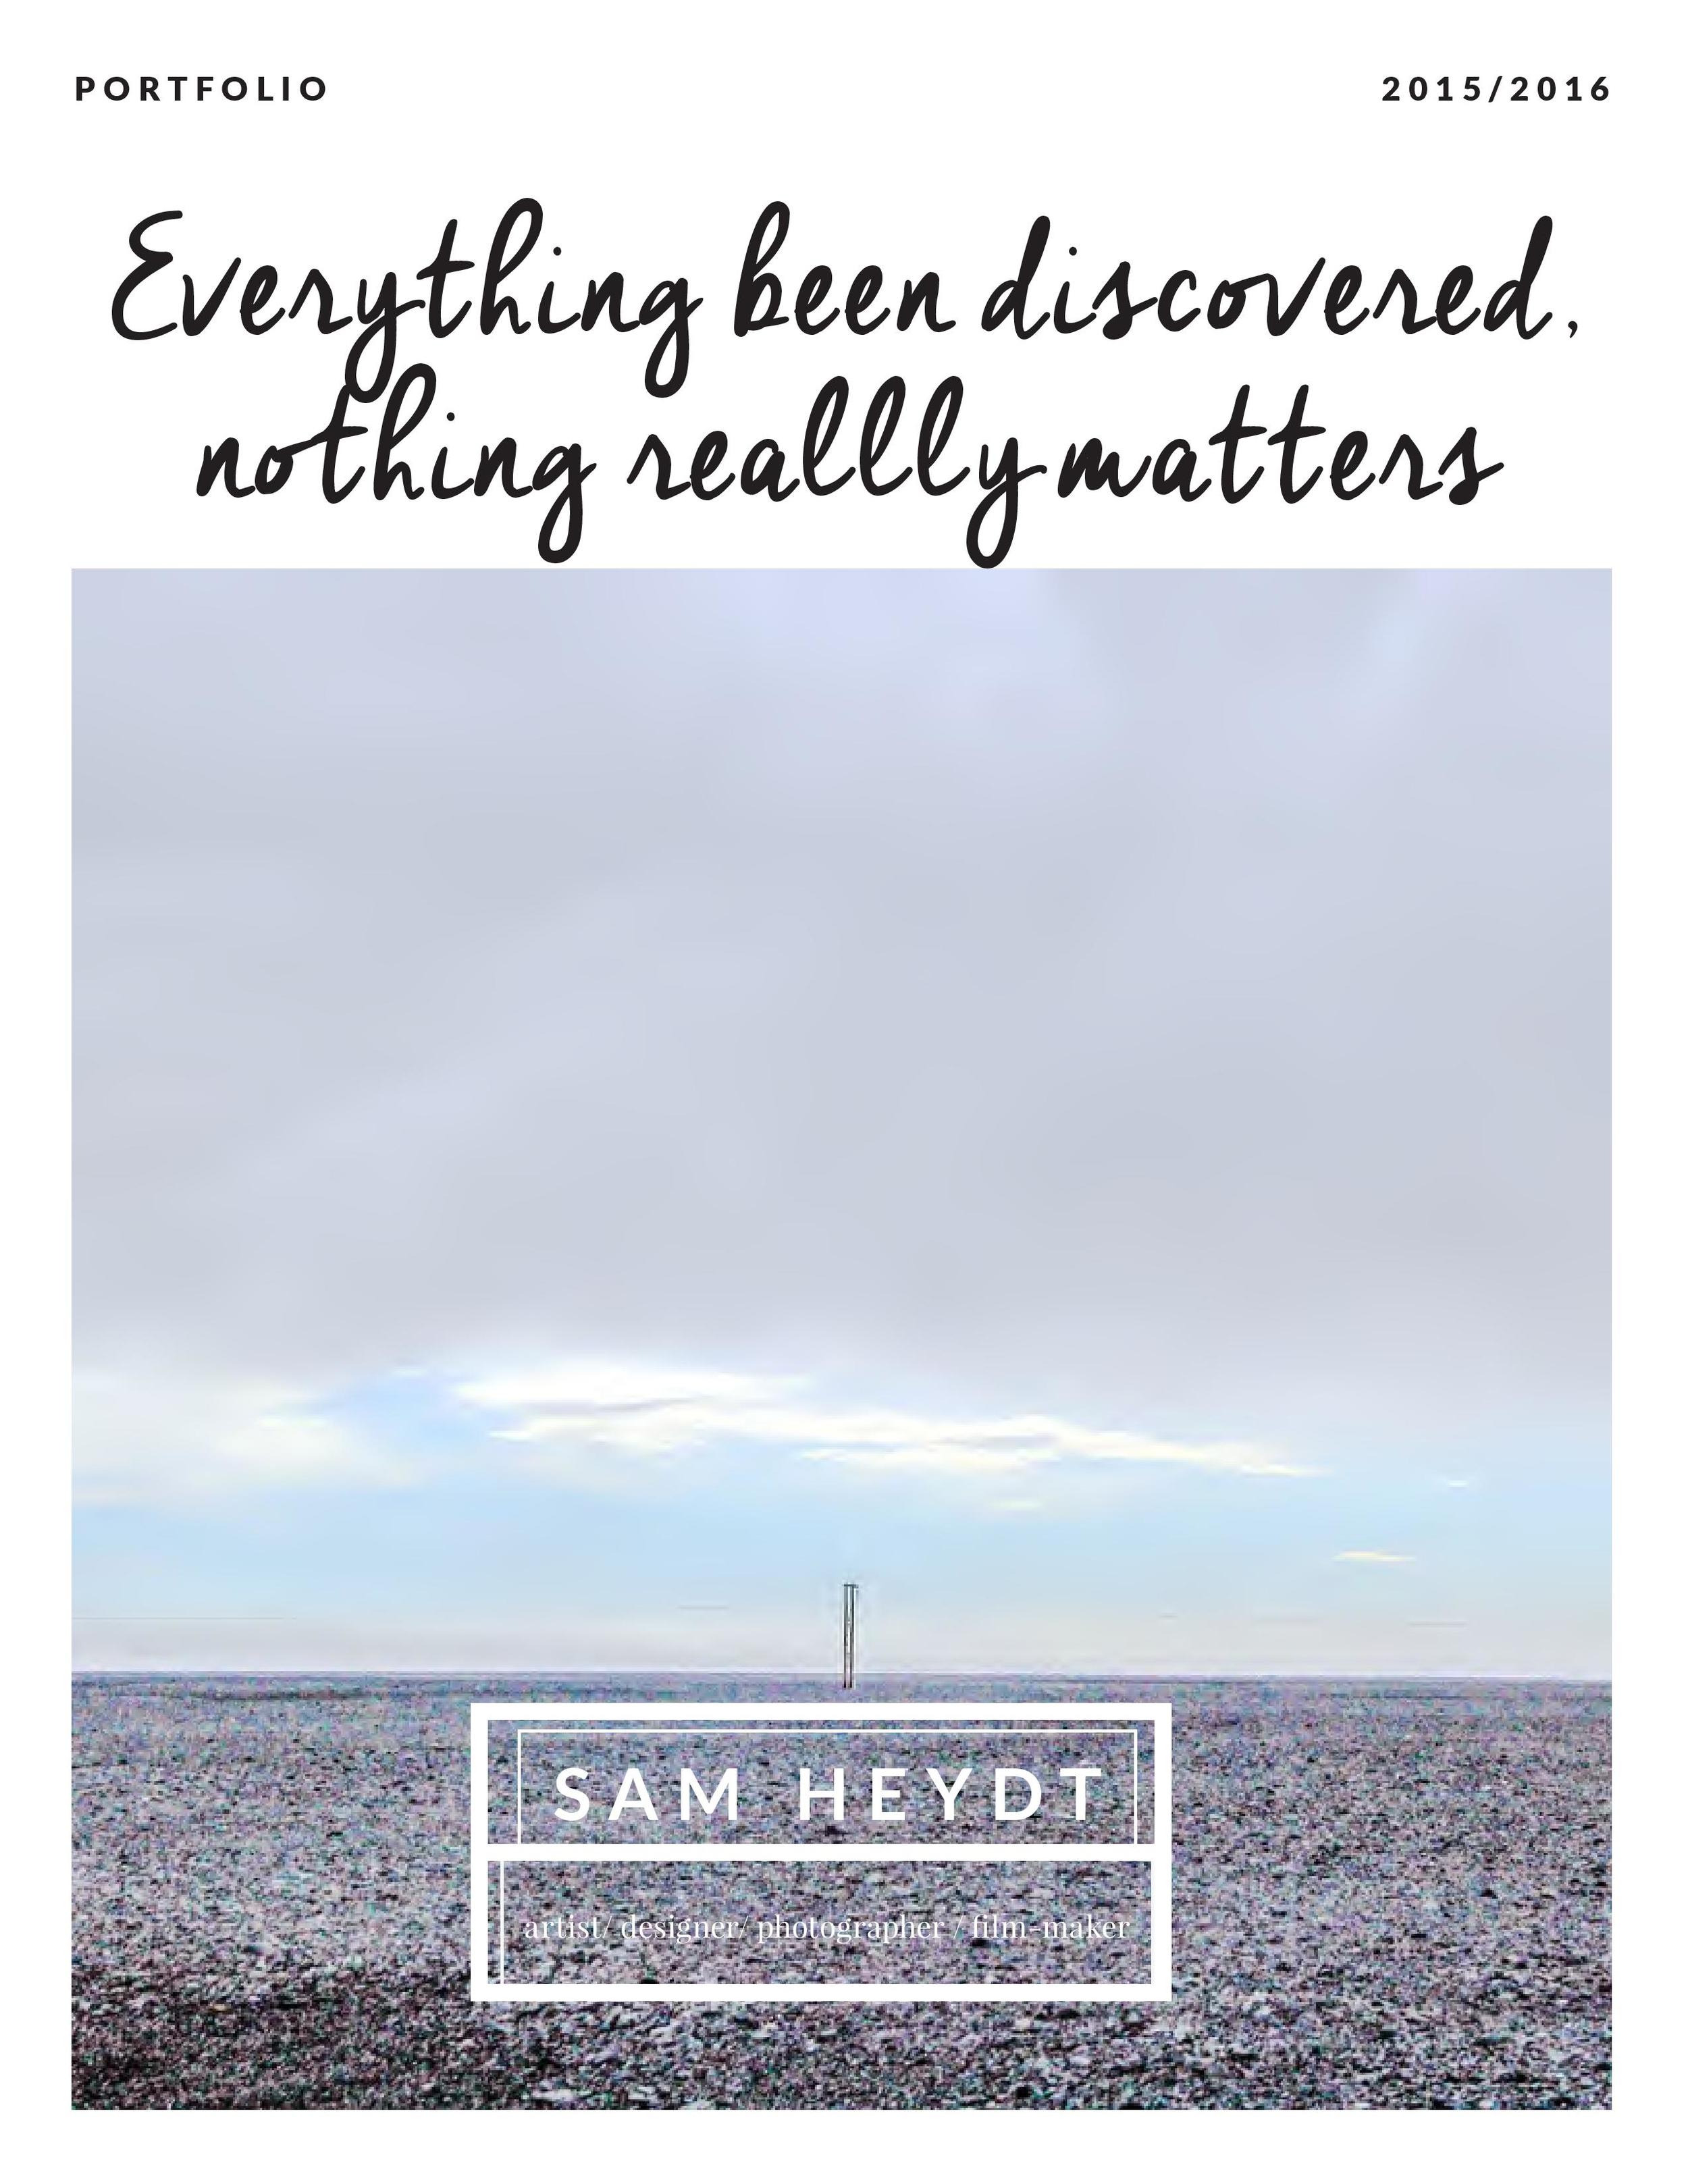 EverythingBeenDiscoveredNothingReallyMatters-Catalog-HEYDT-email-page-001.jpg